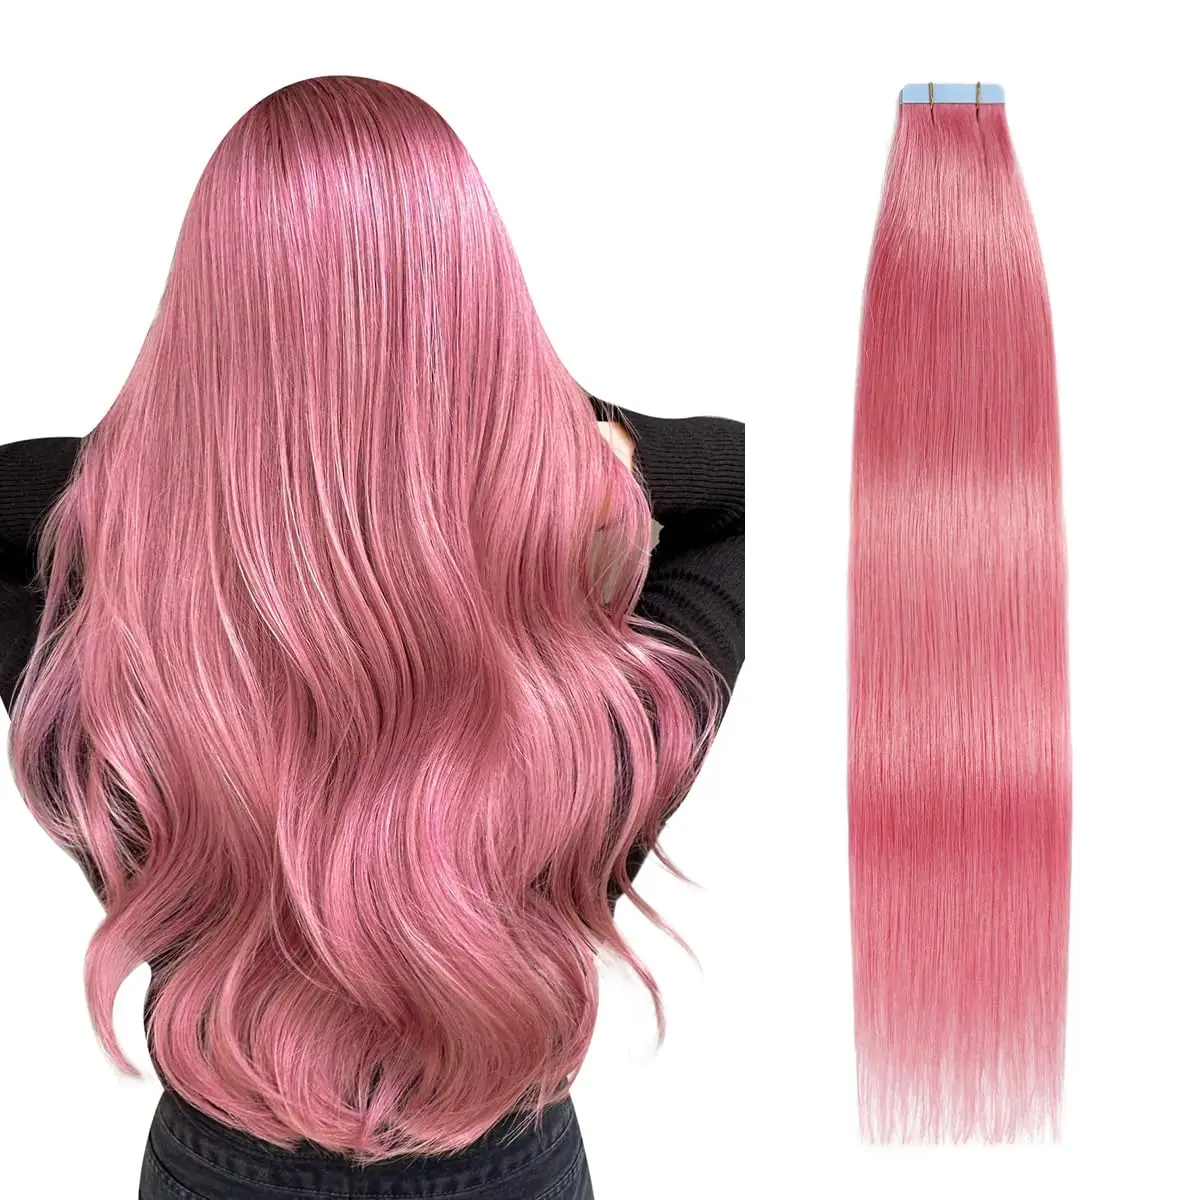 tape-in-hair-extensions-human-hair-hot-pink-pu-tape-in-hair-extensions-30-inch-40pcs-pack-straight-tape-in-extensions-100g